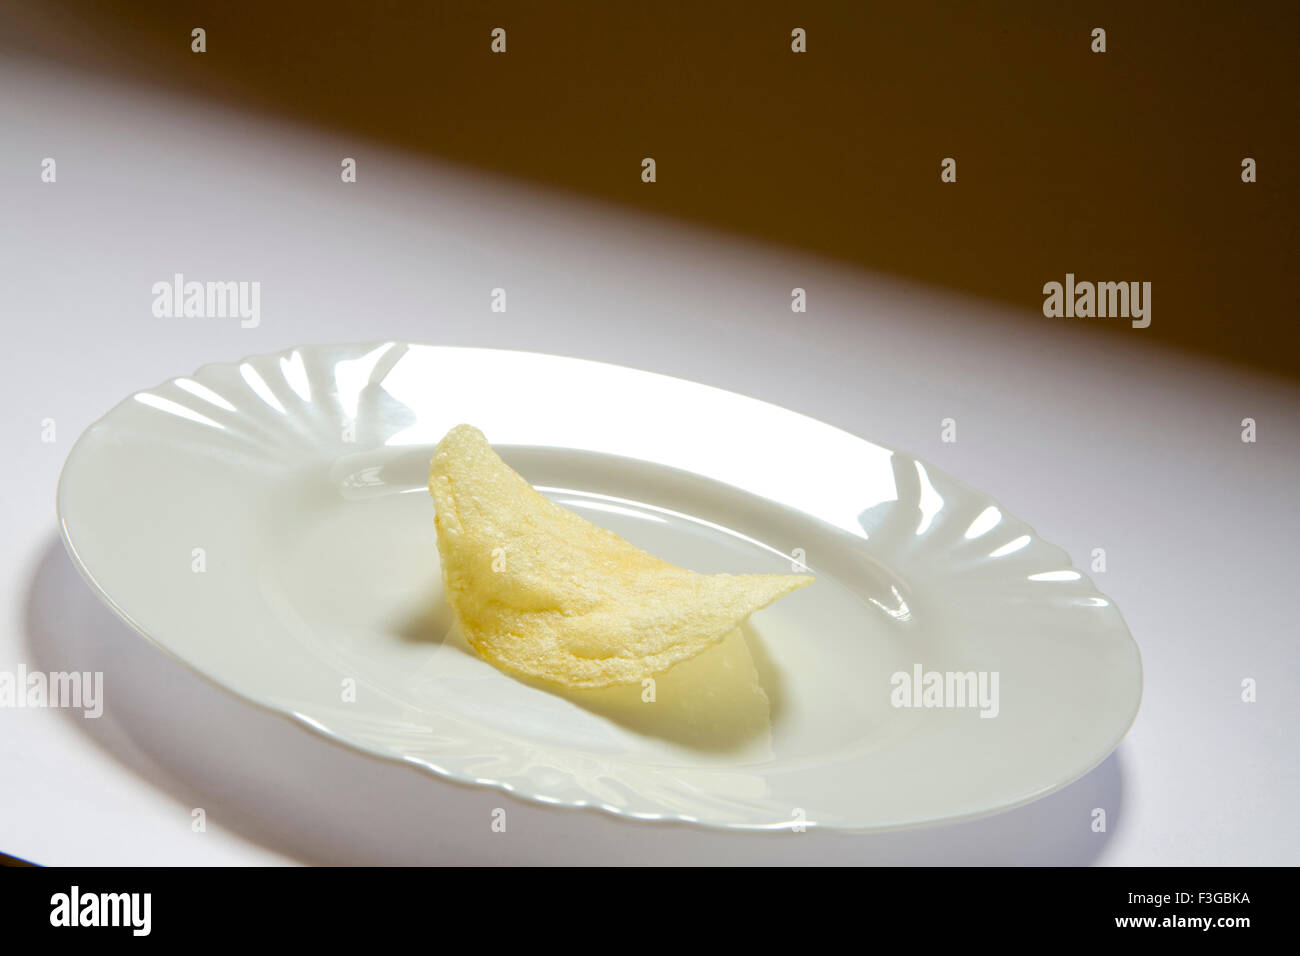 Junk food snacks salty potato chips or wafer served in plate Stock Photo